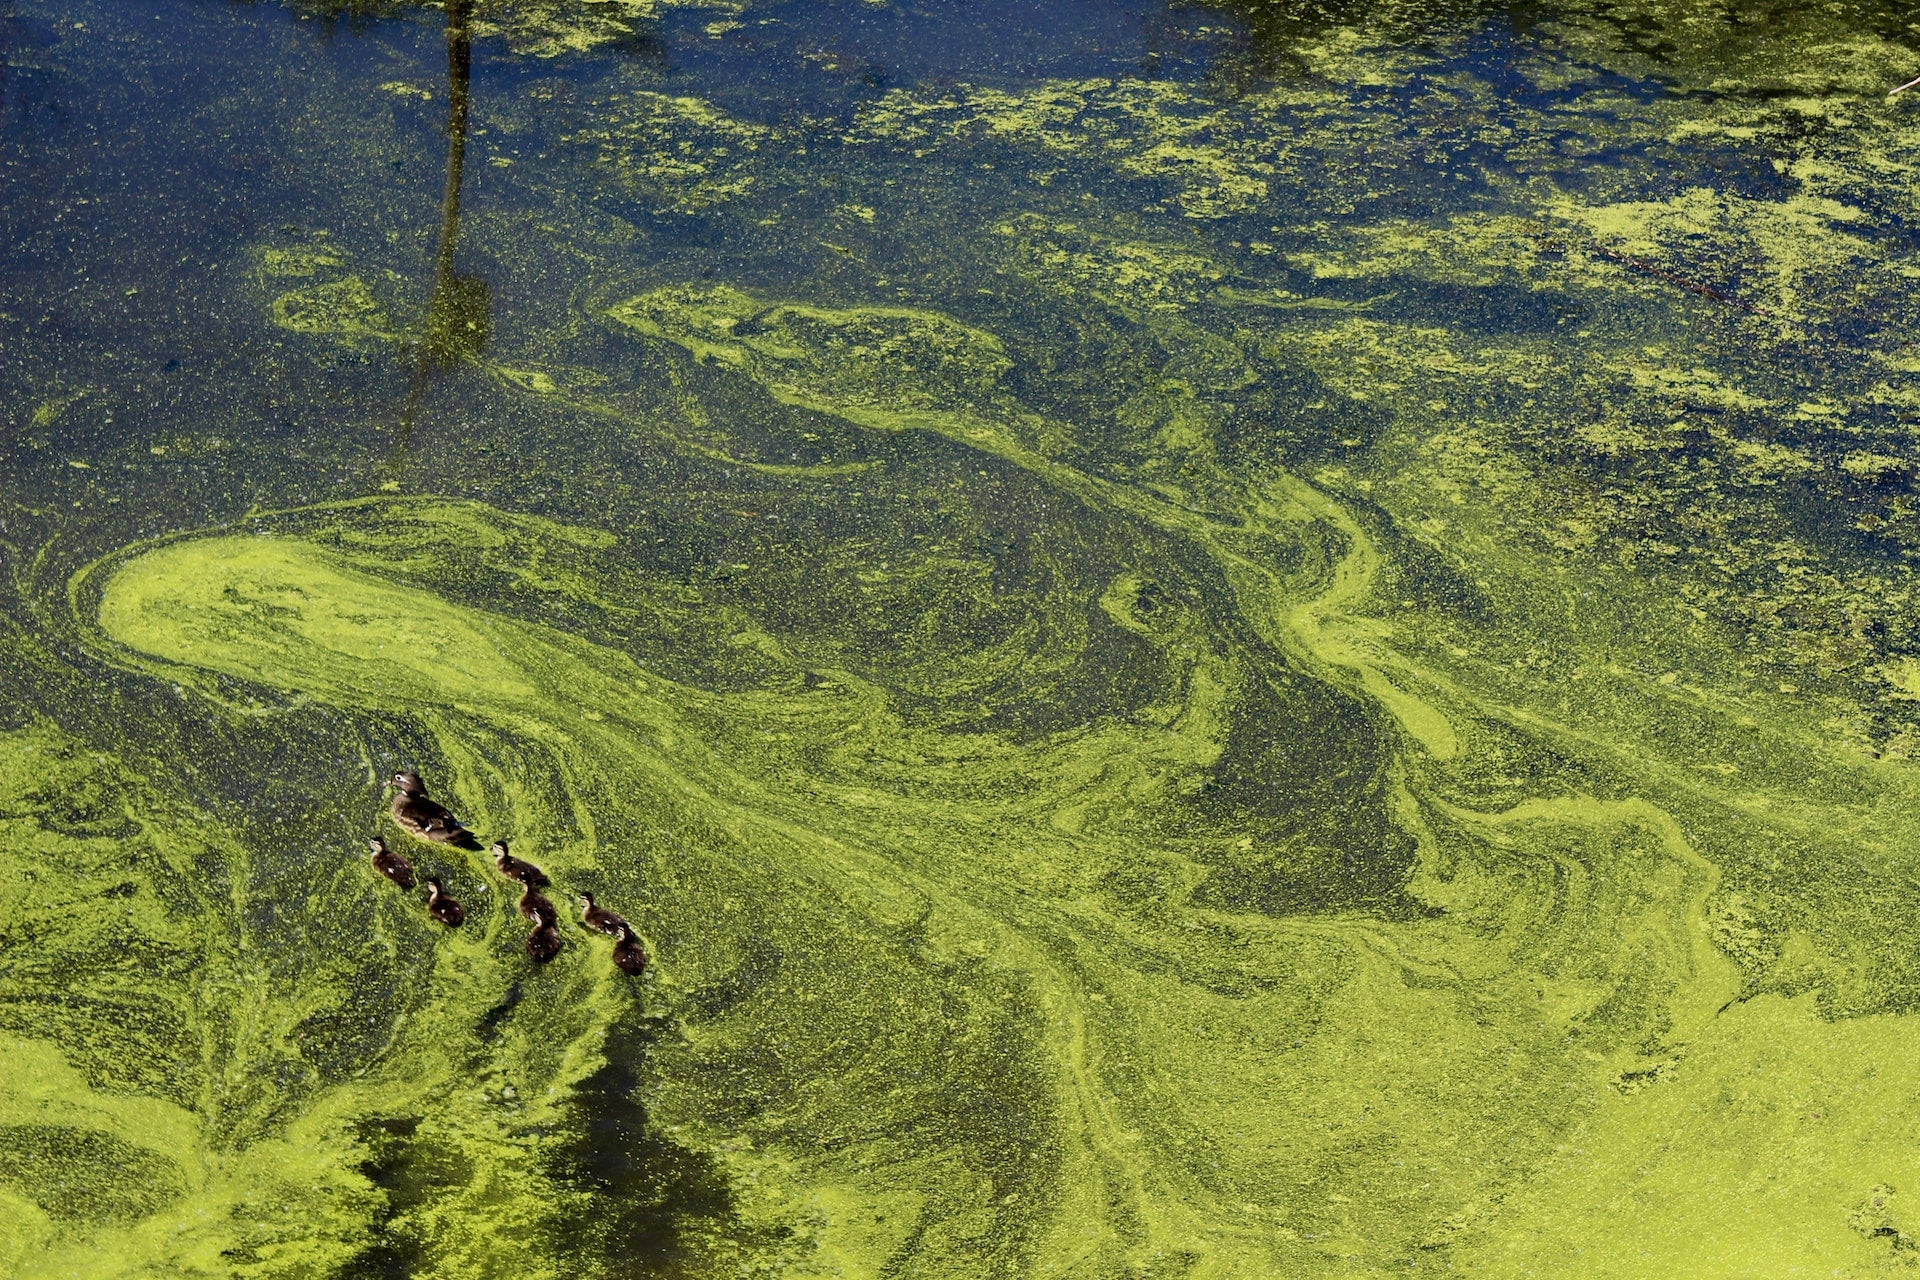 Blue-green algae blooms can release harmful toxins into the air